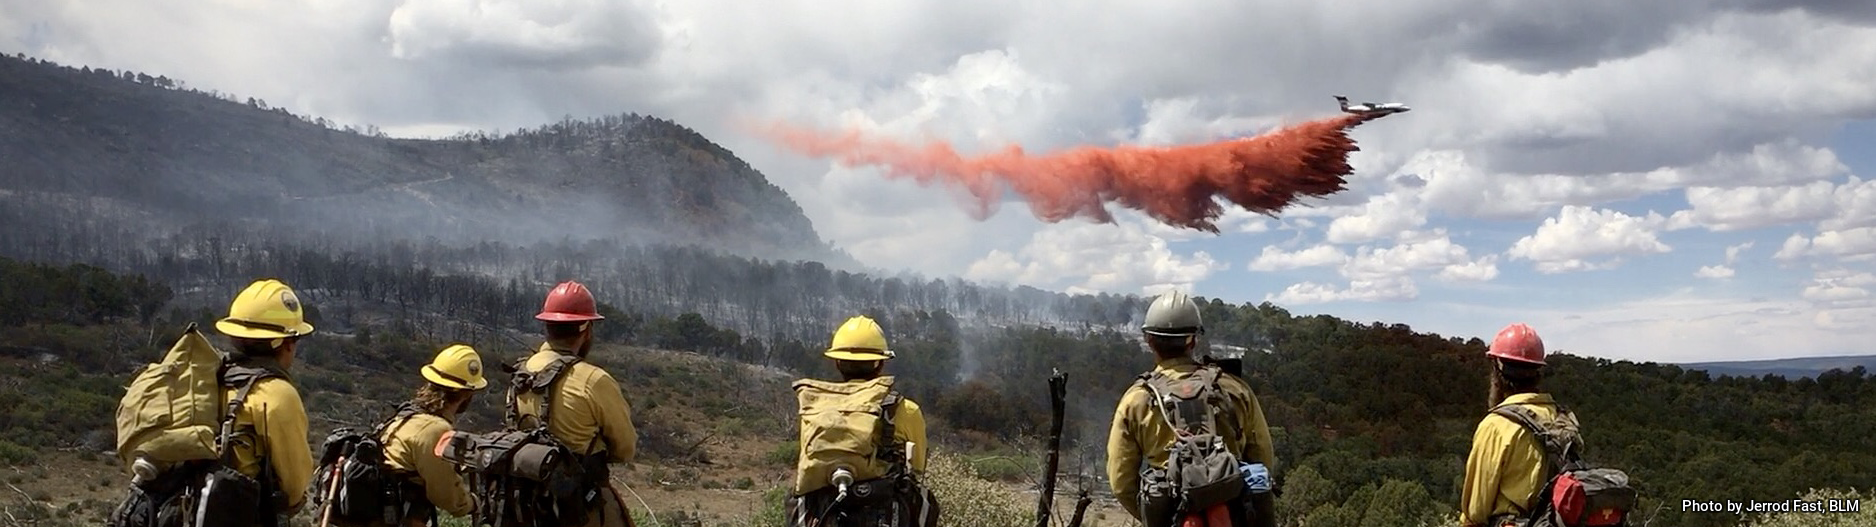 Wildland firefighters watch an airtanker drop retardant on the Horse Park Fire in Colorado in 2018. | Photo by Jerrod Fast, BLM